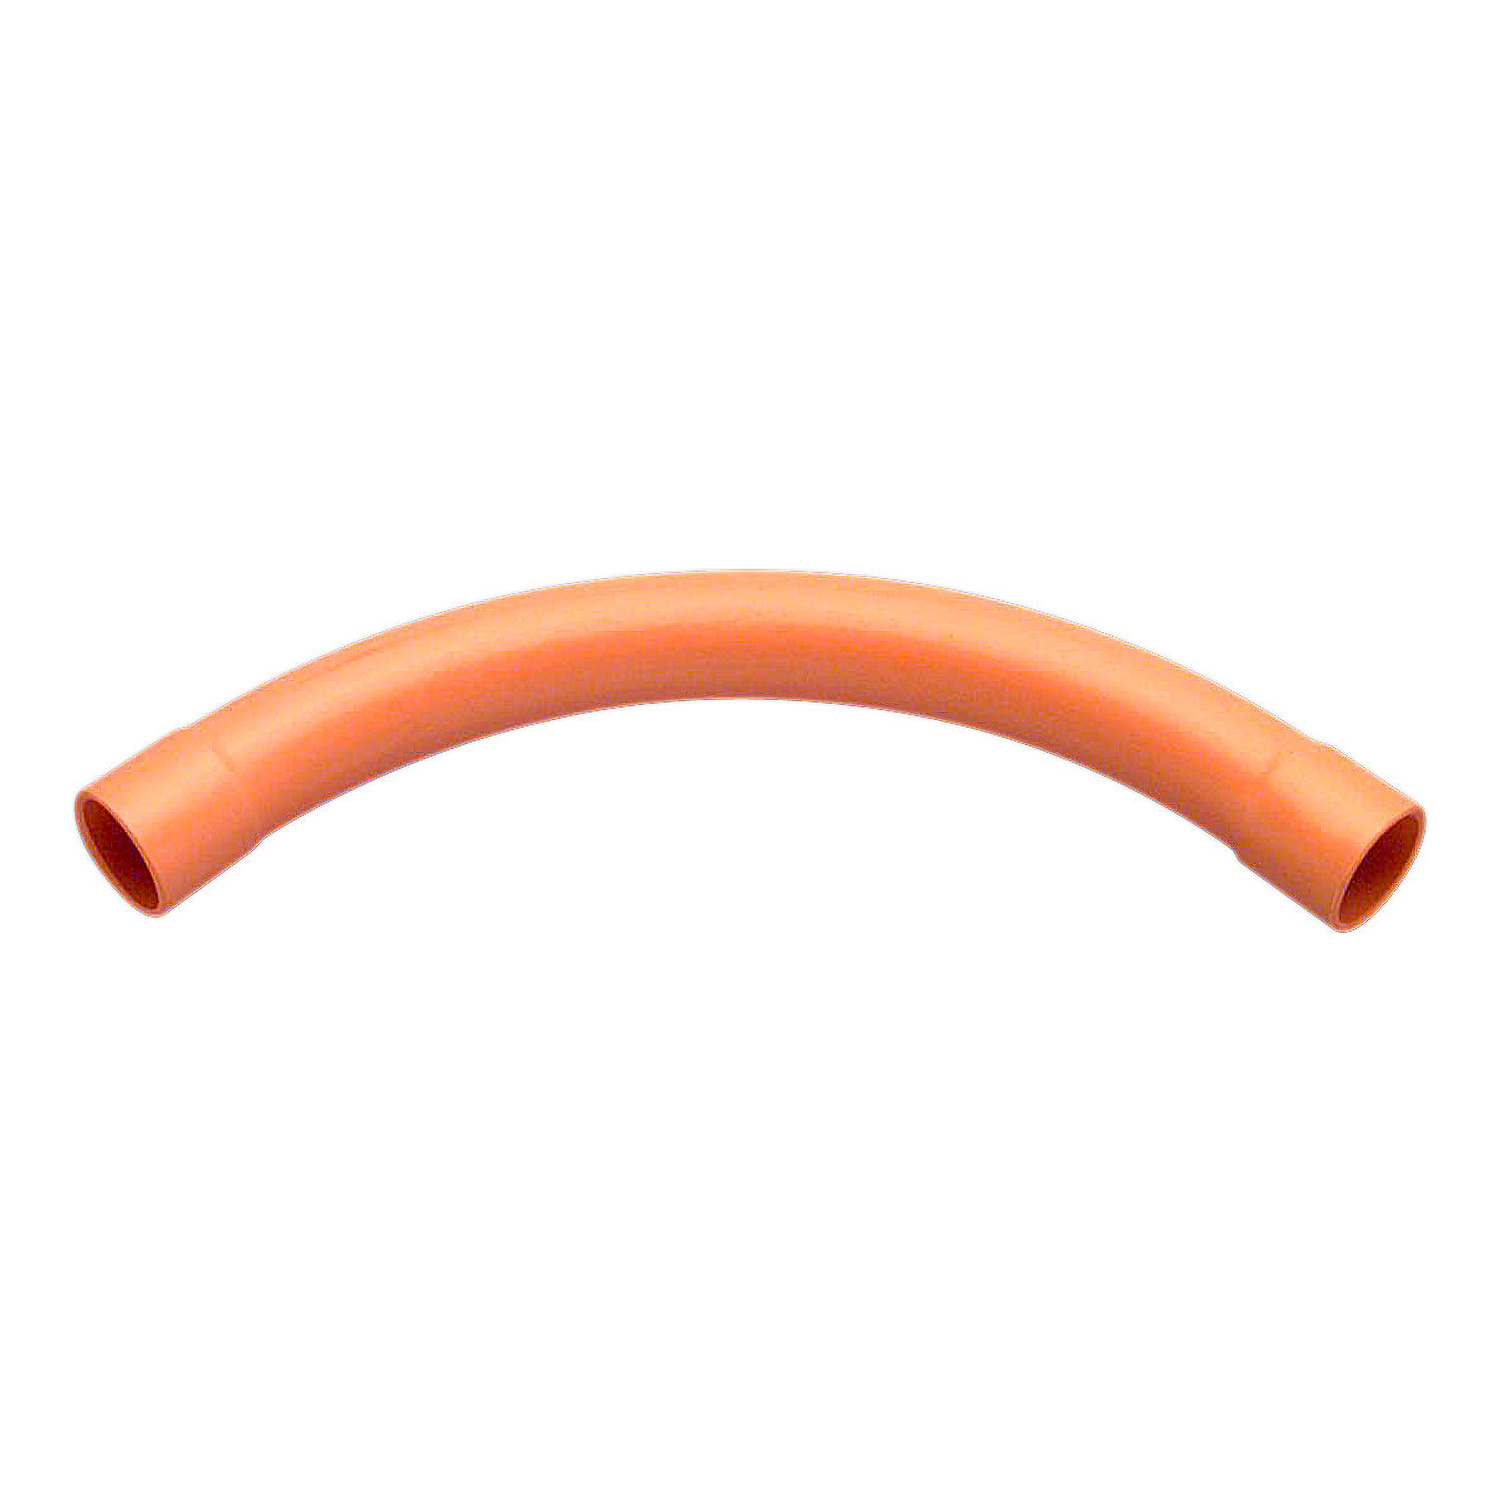 Solid Fittings - PVC, 90 Degree Heavy Duty Sweep Bends, 25mm, Grey